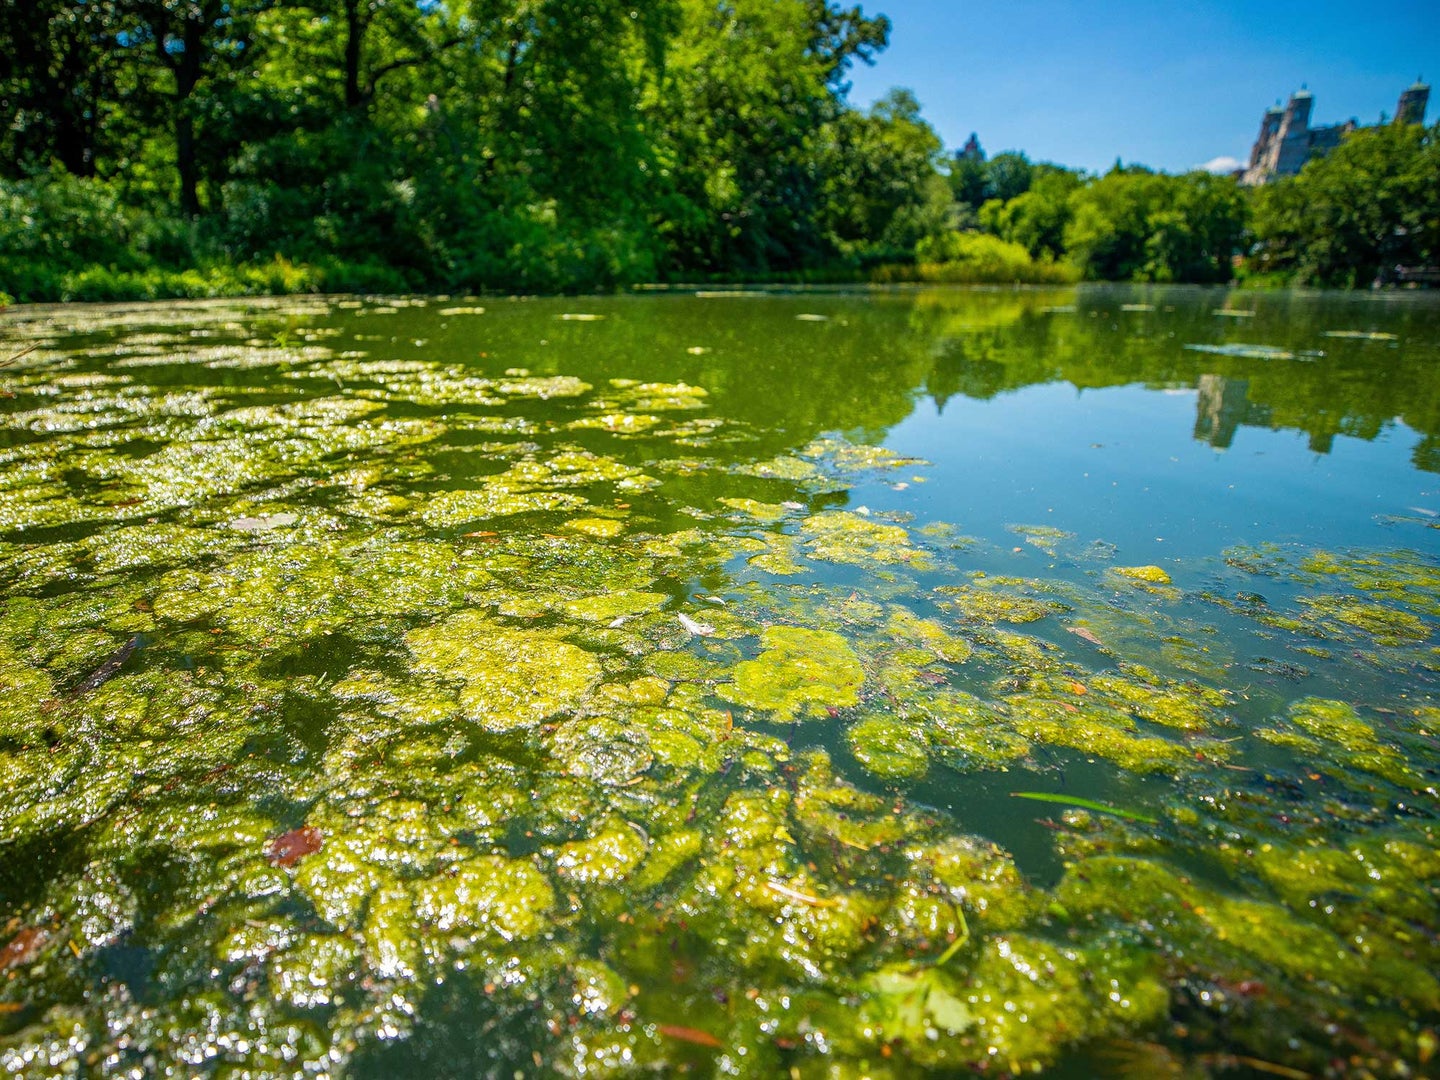 A photo of algae in a lake in Central Park.